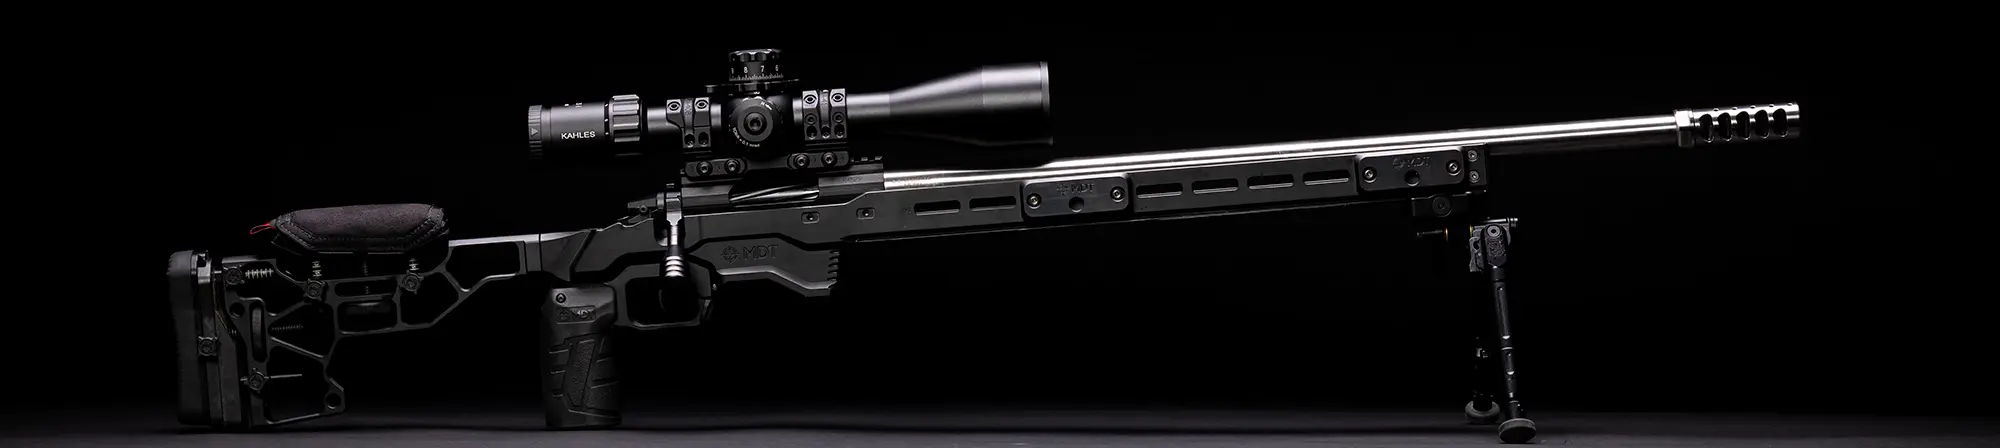 PRS Precision Competition Rifle - Performance Weapons Systems